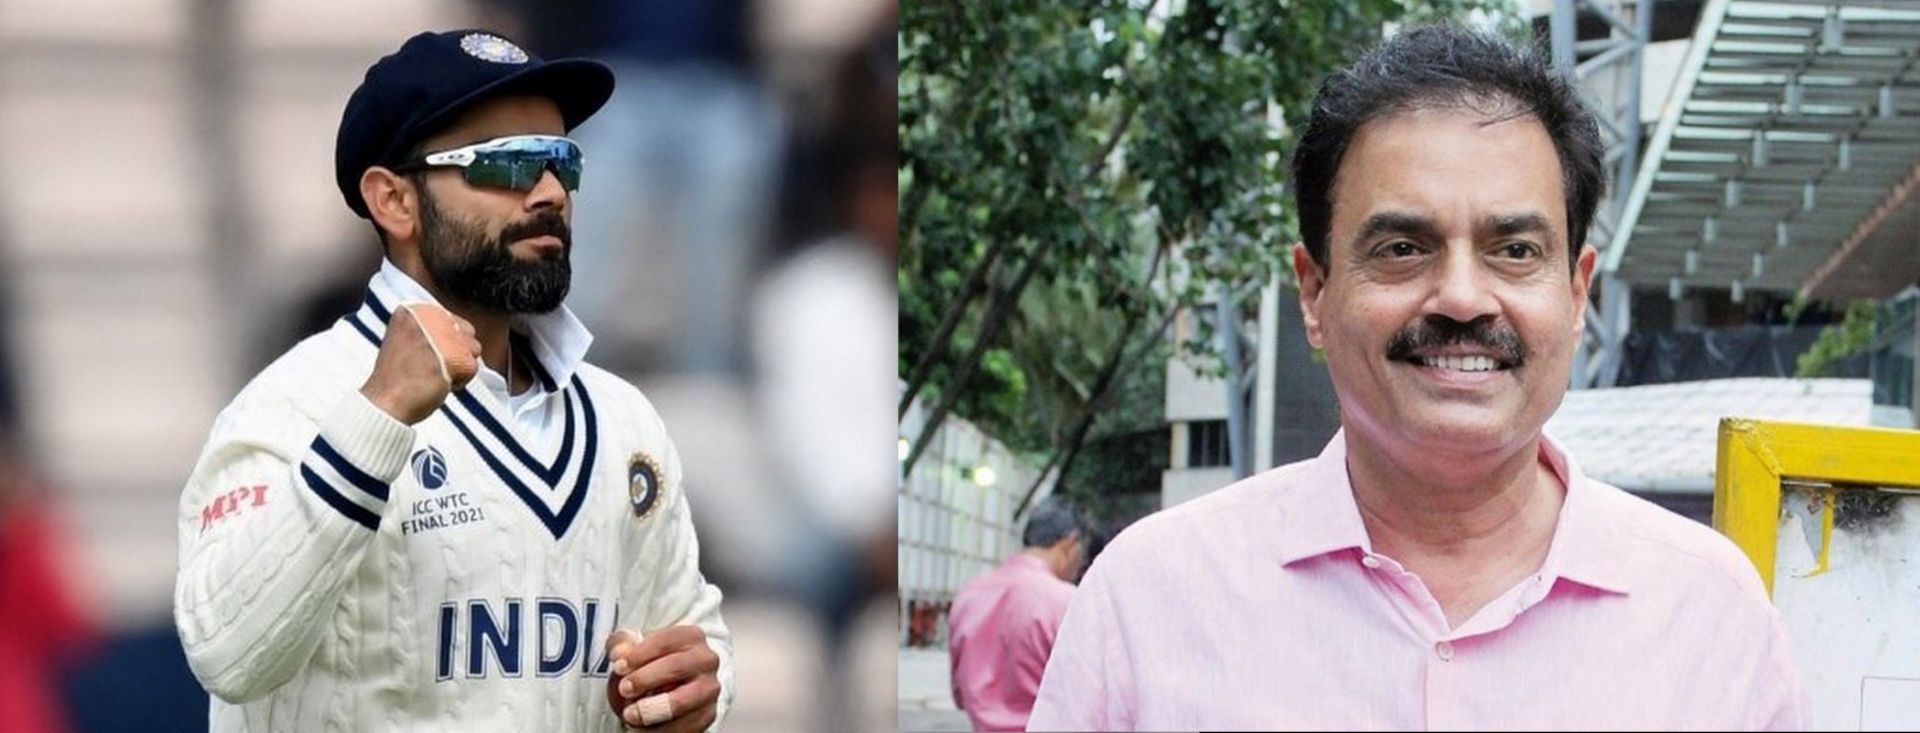 Hailed for his ability to spot talent, former chief selector Dilip Vengsarkar was the one who handed Virat Kohli his national selection in 2008.